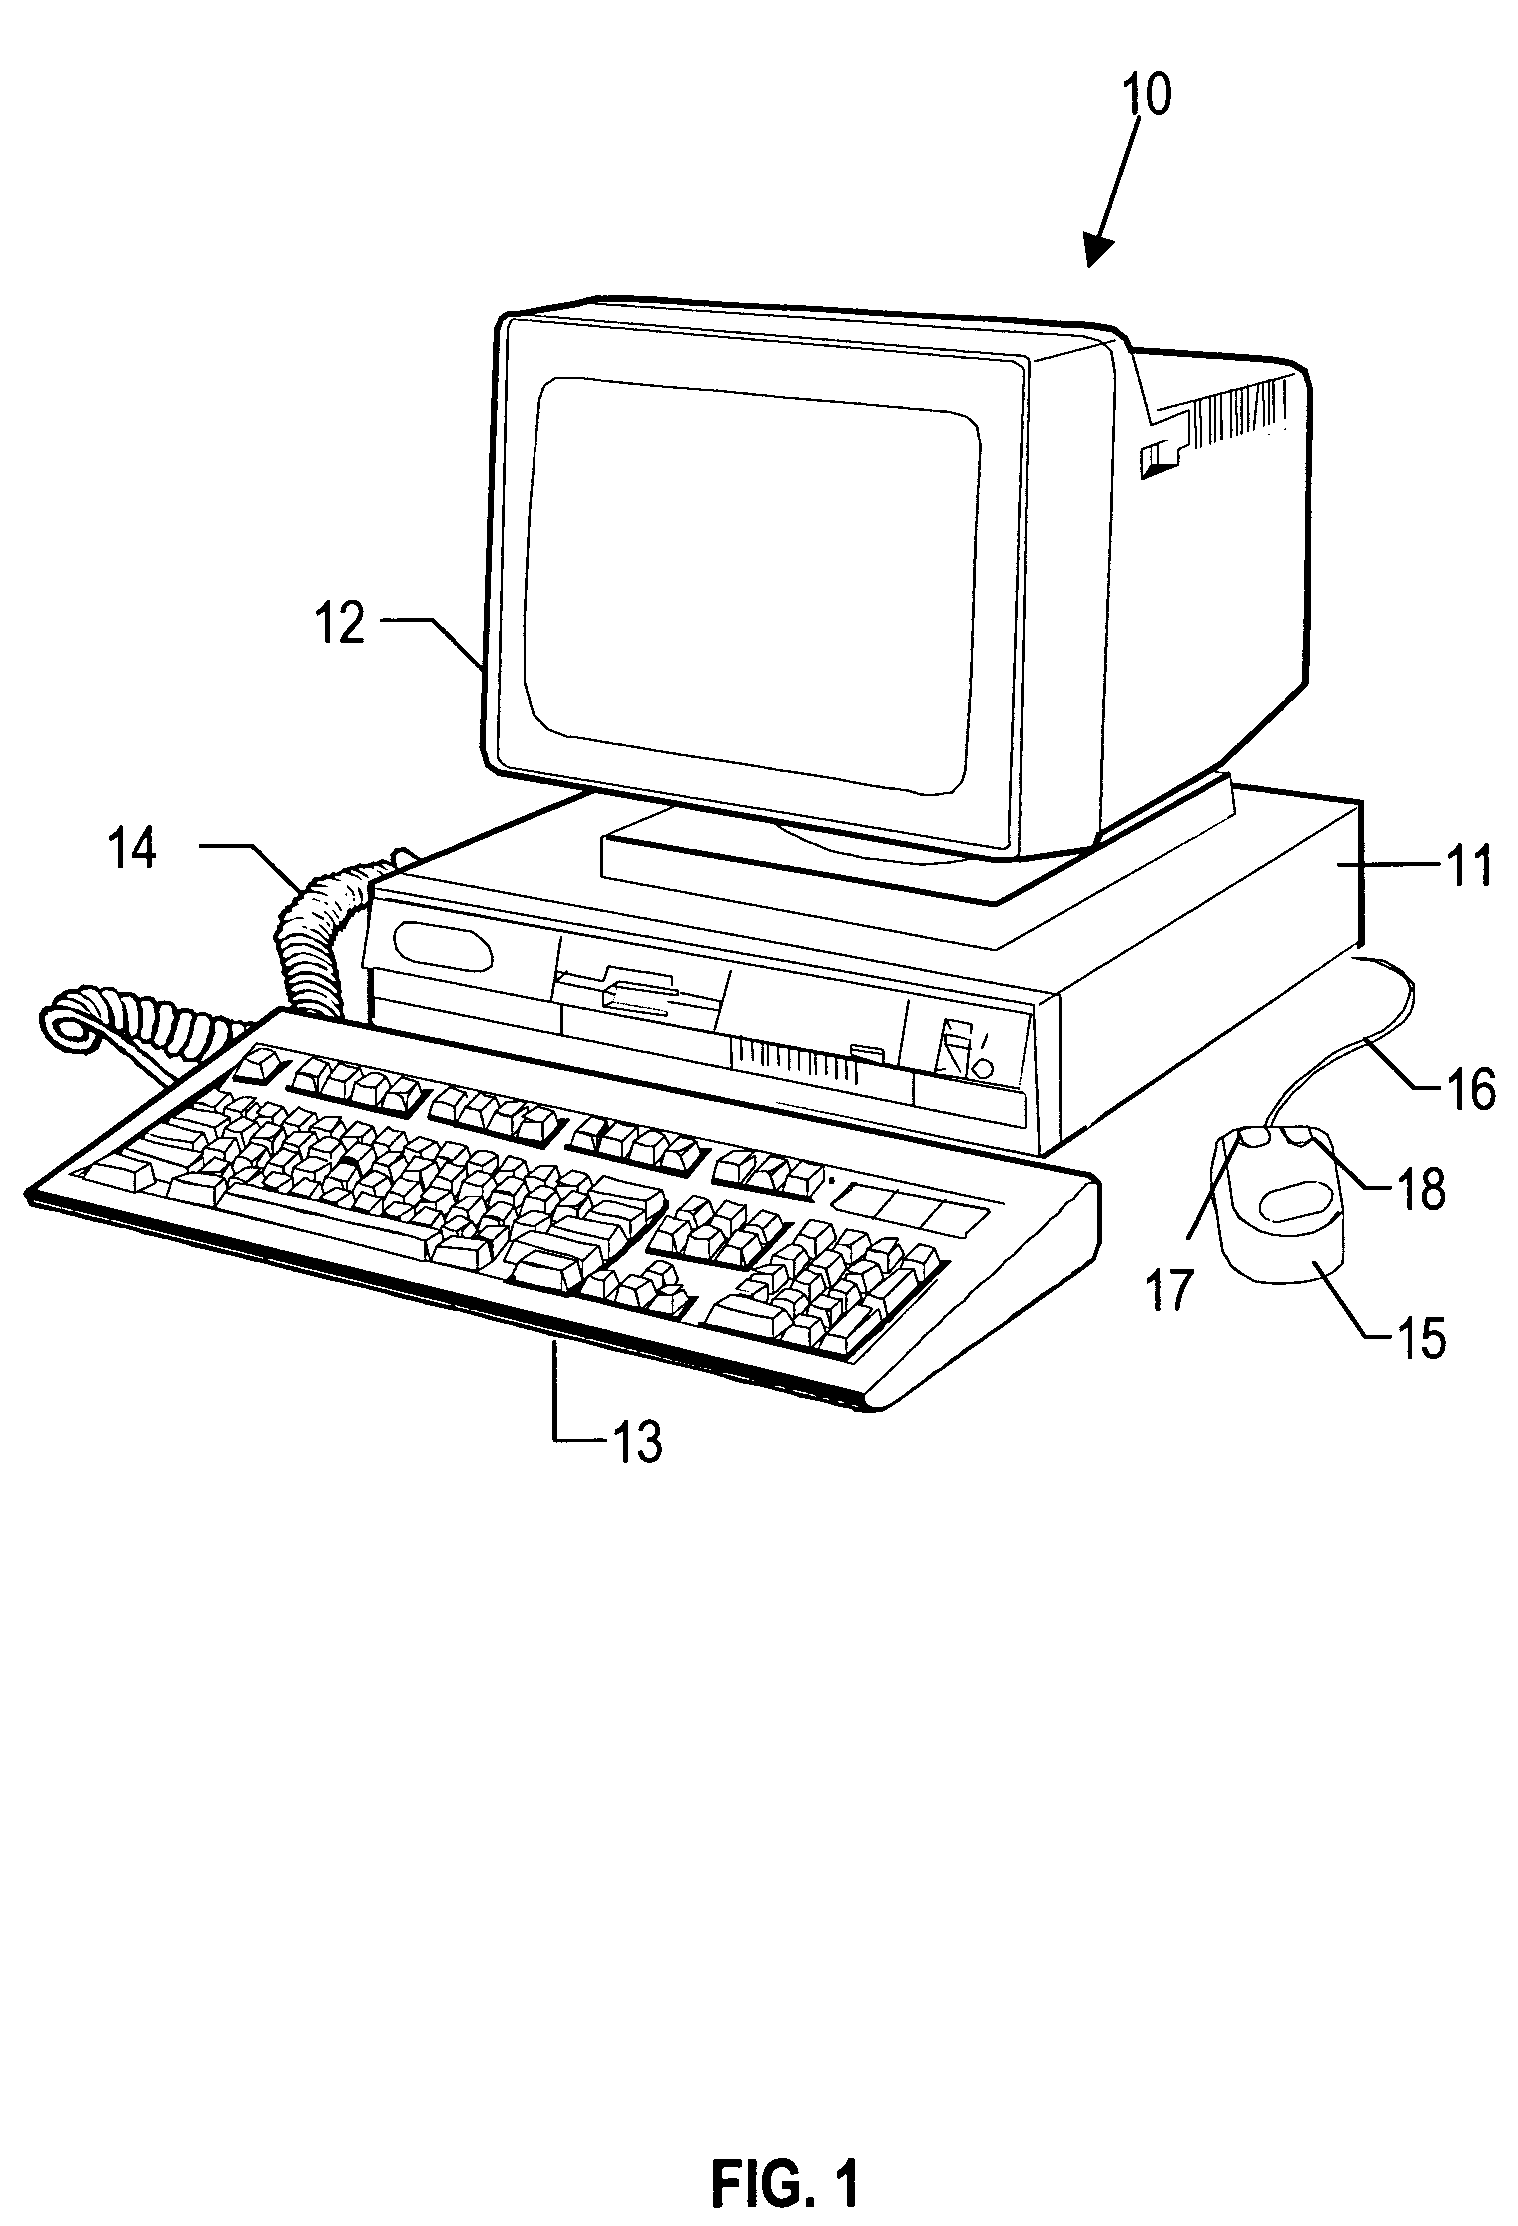 System and method for performing predictive file storage management